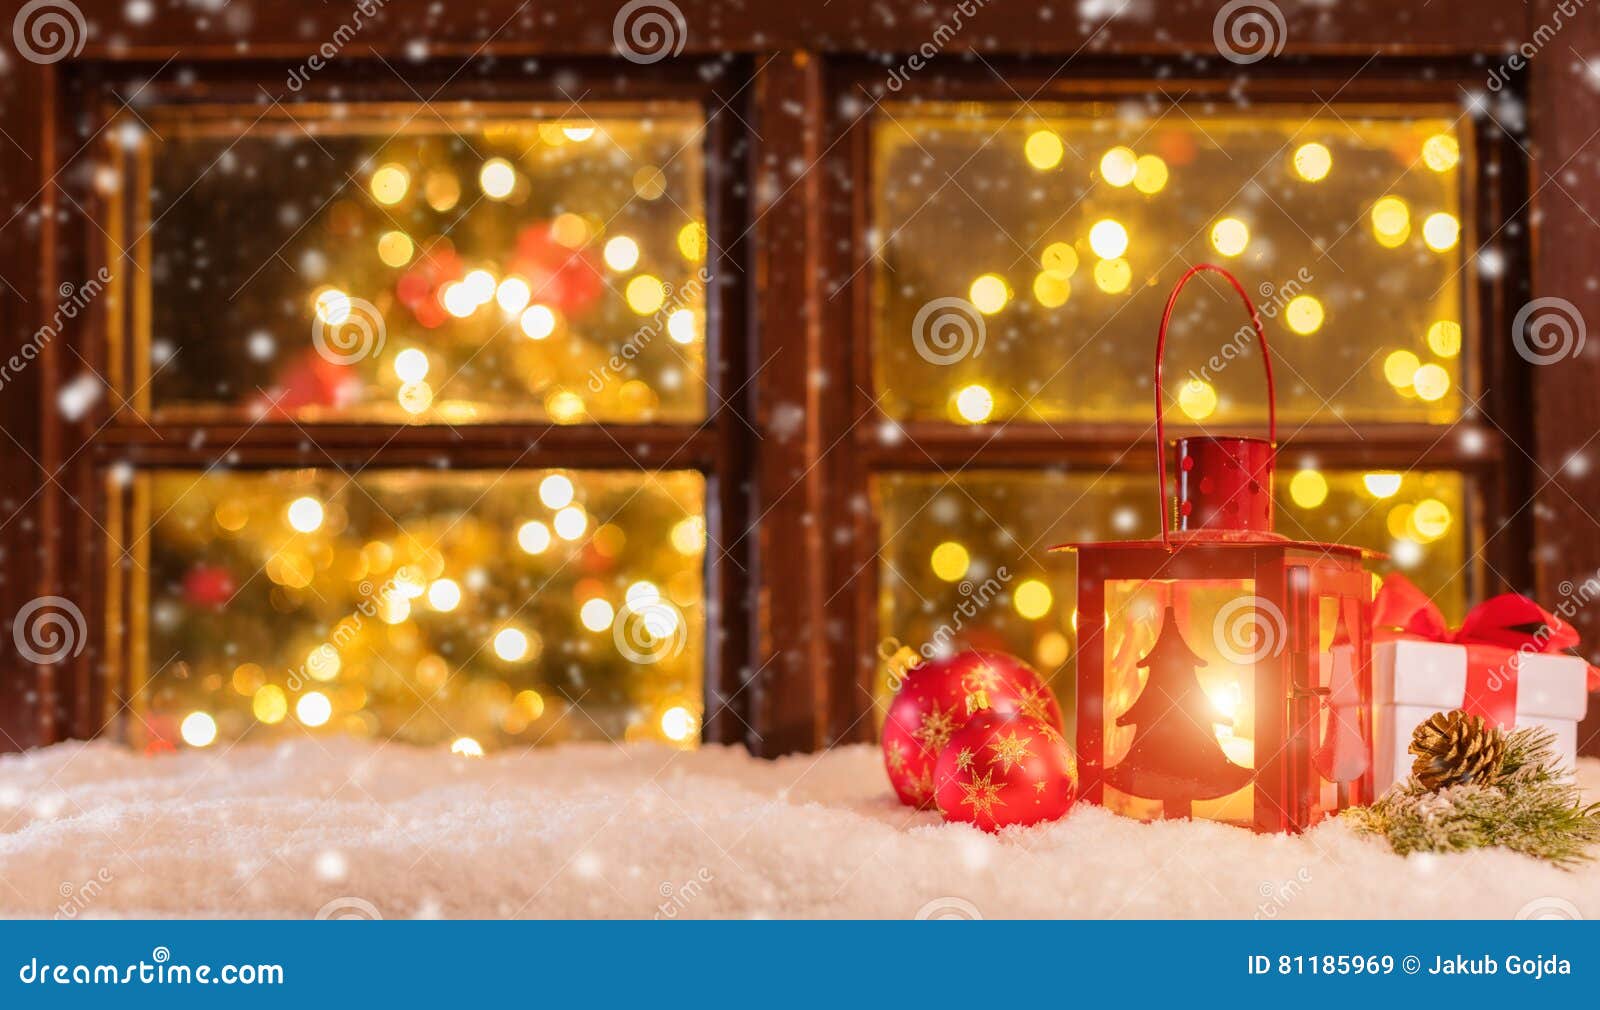 Atmospheric Christmas Window Sill with Decoration Stock Image - Image ...